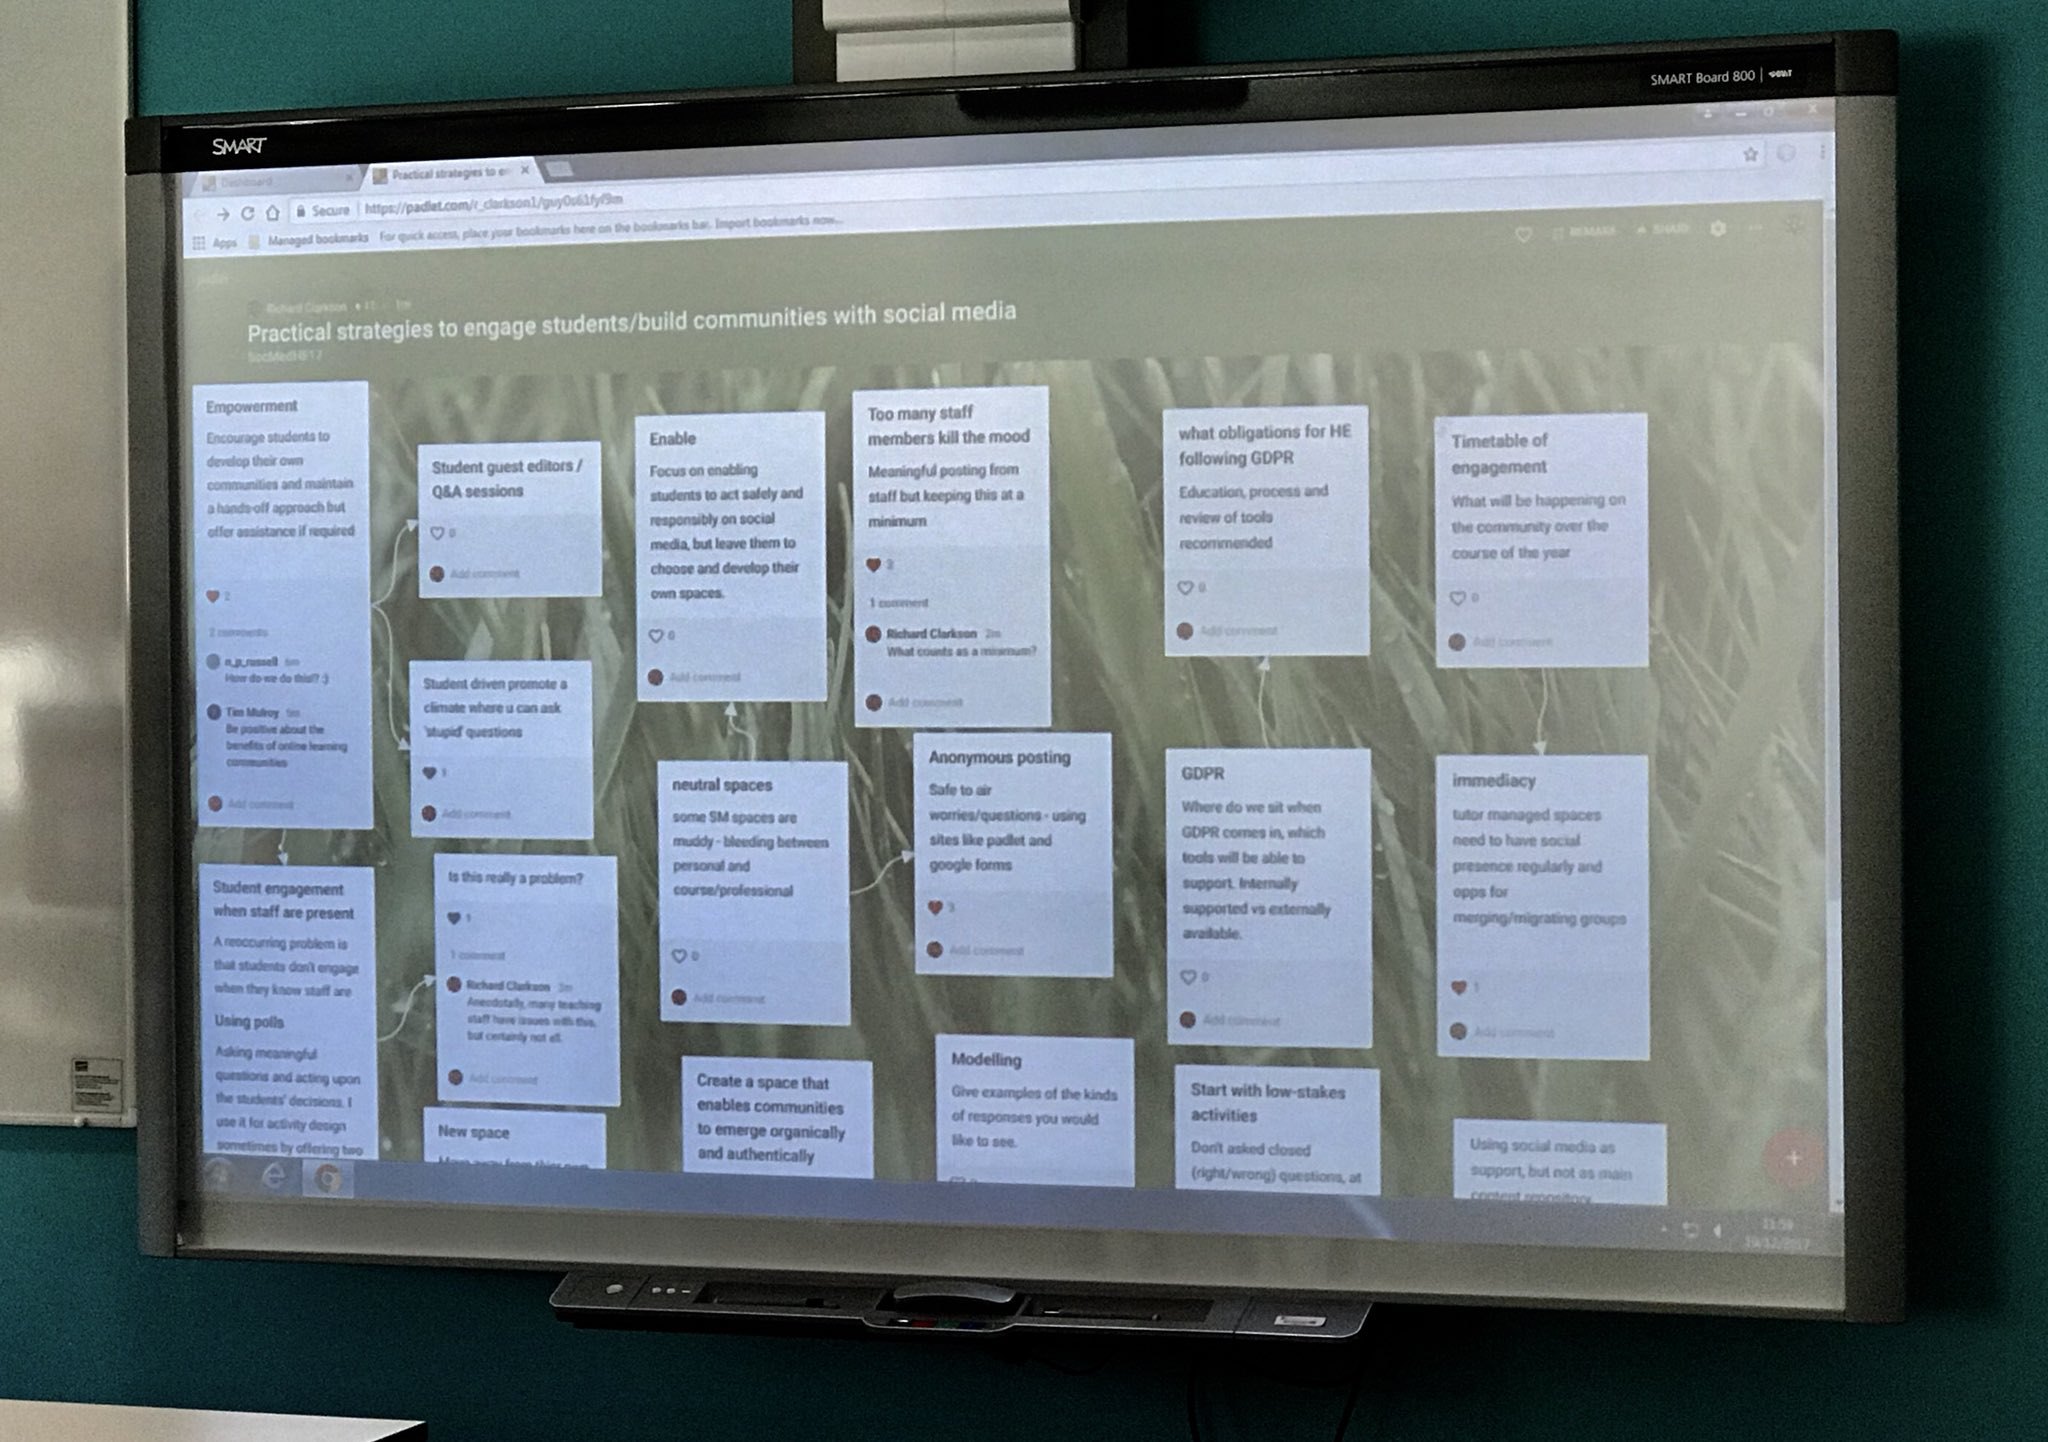 You know you are in a social media conference when the room is quiet but the padlet on the screen is non-stop changing! #SocMedHe17 Check some ideas on how to build and engage students in digital communities. https://t.co/FKmXxgfUY3